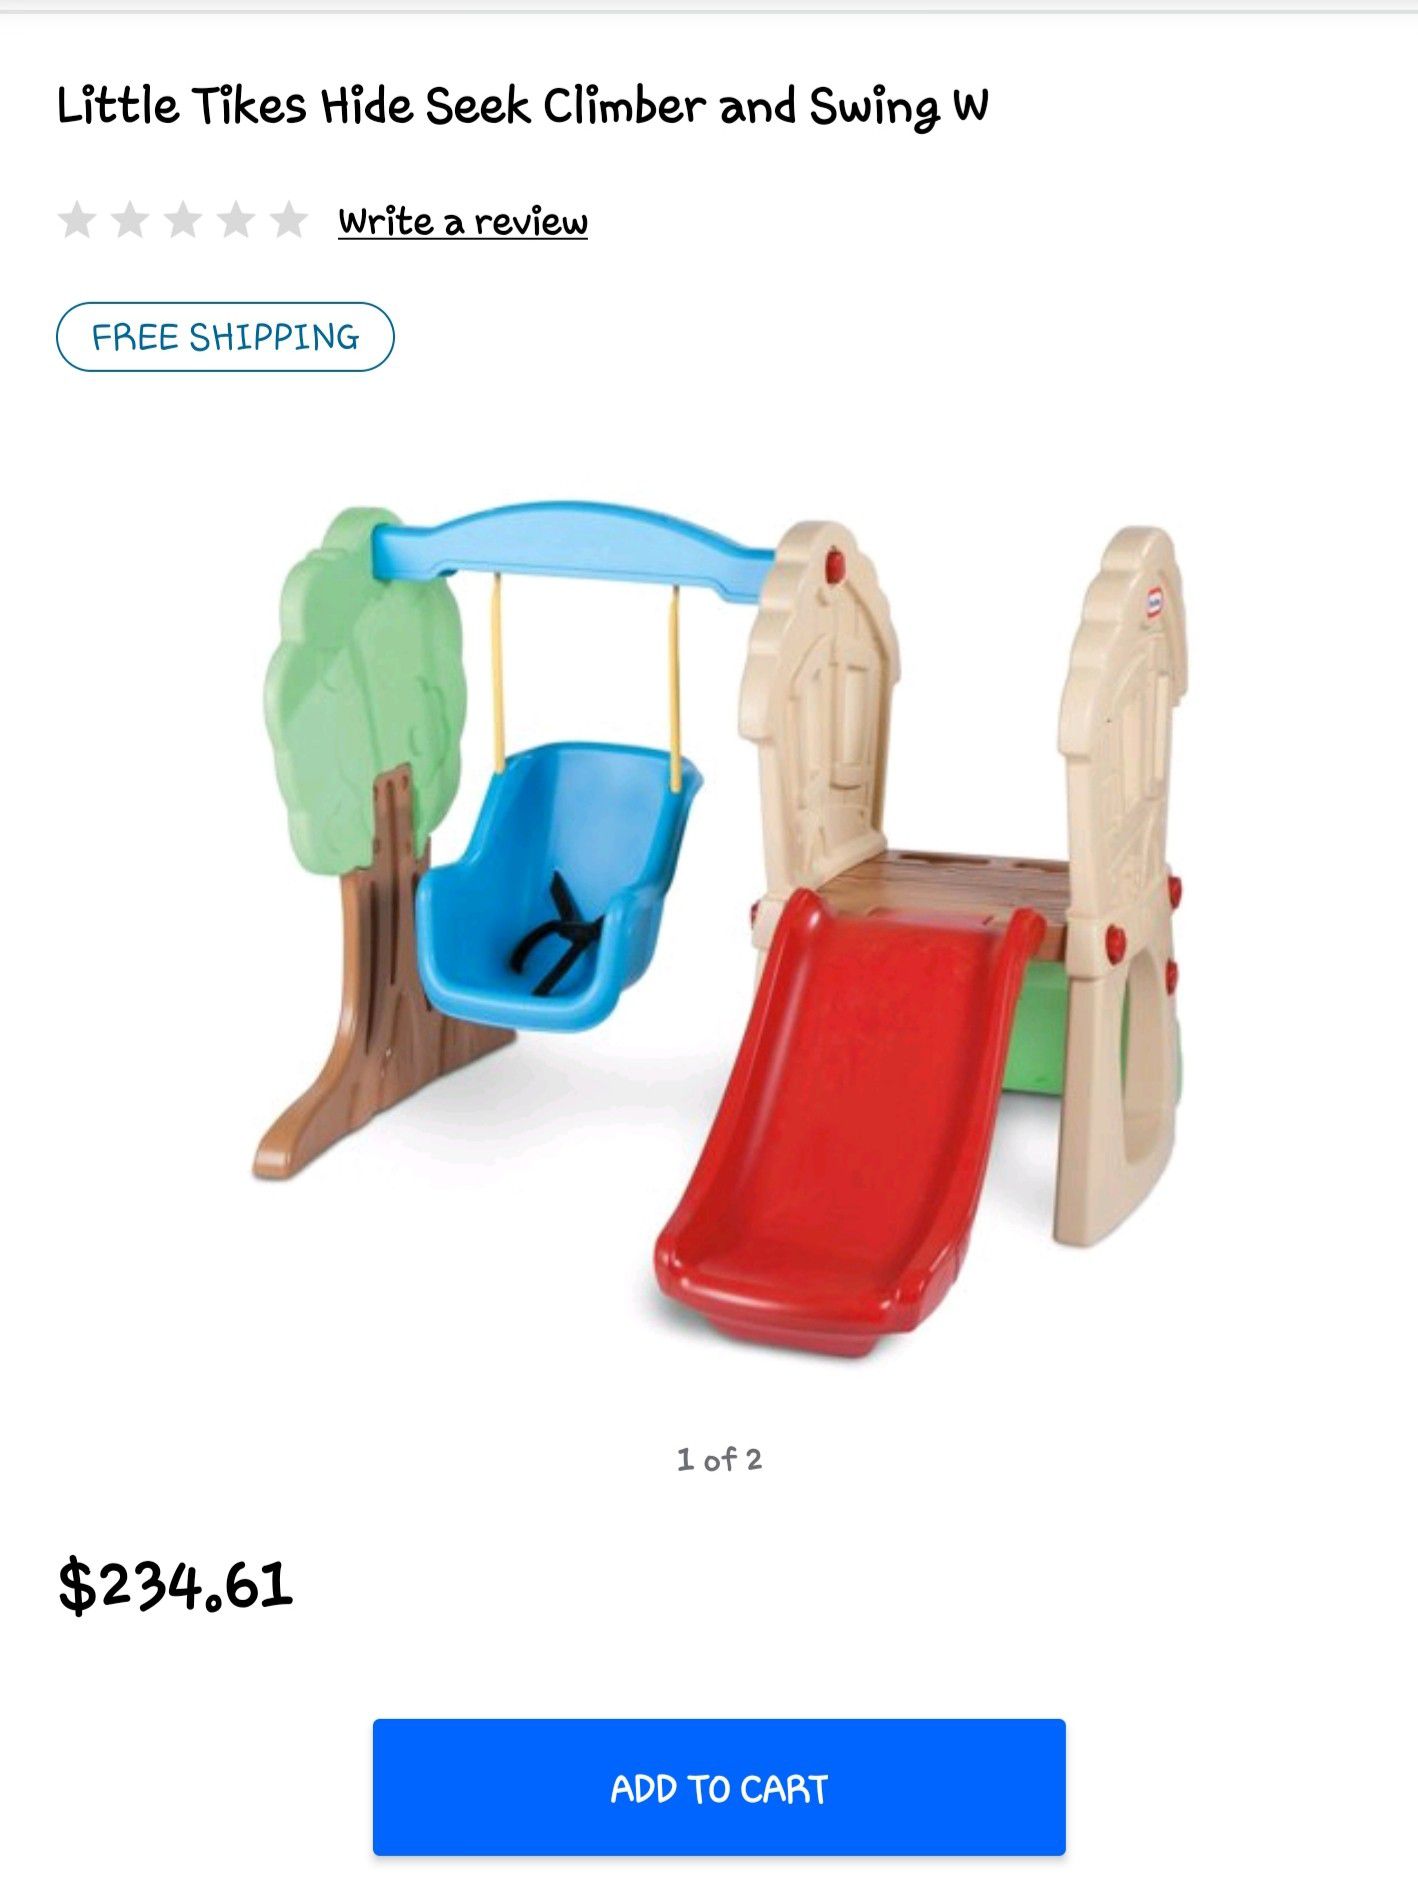 Little Tykes slide and swing set. New in box